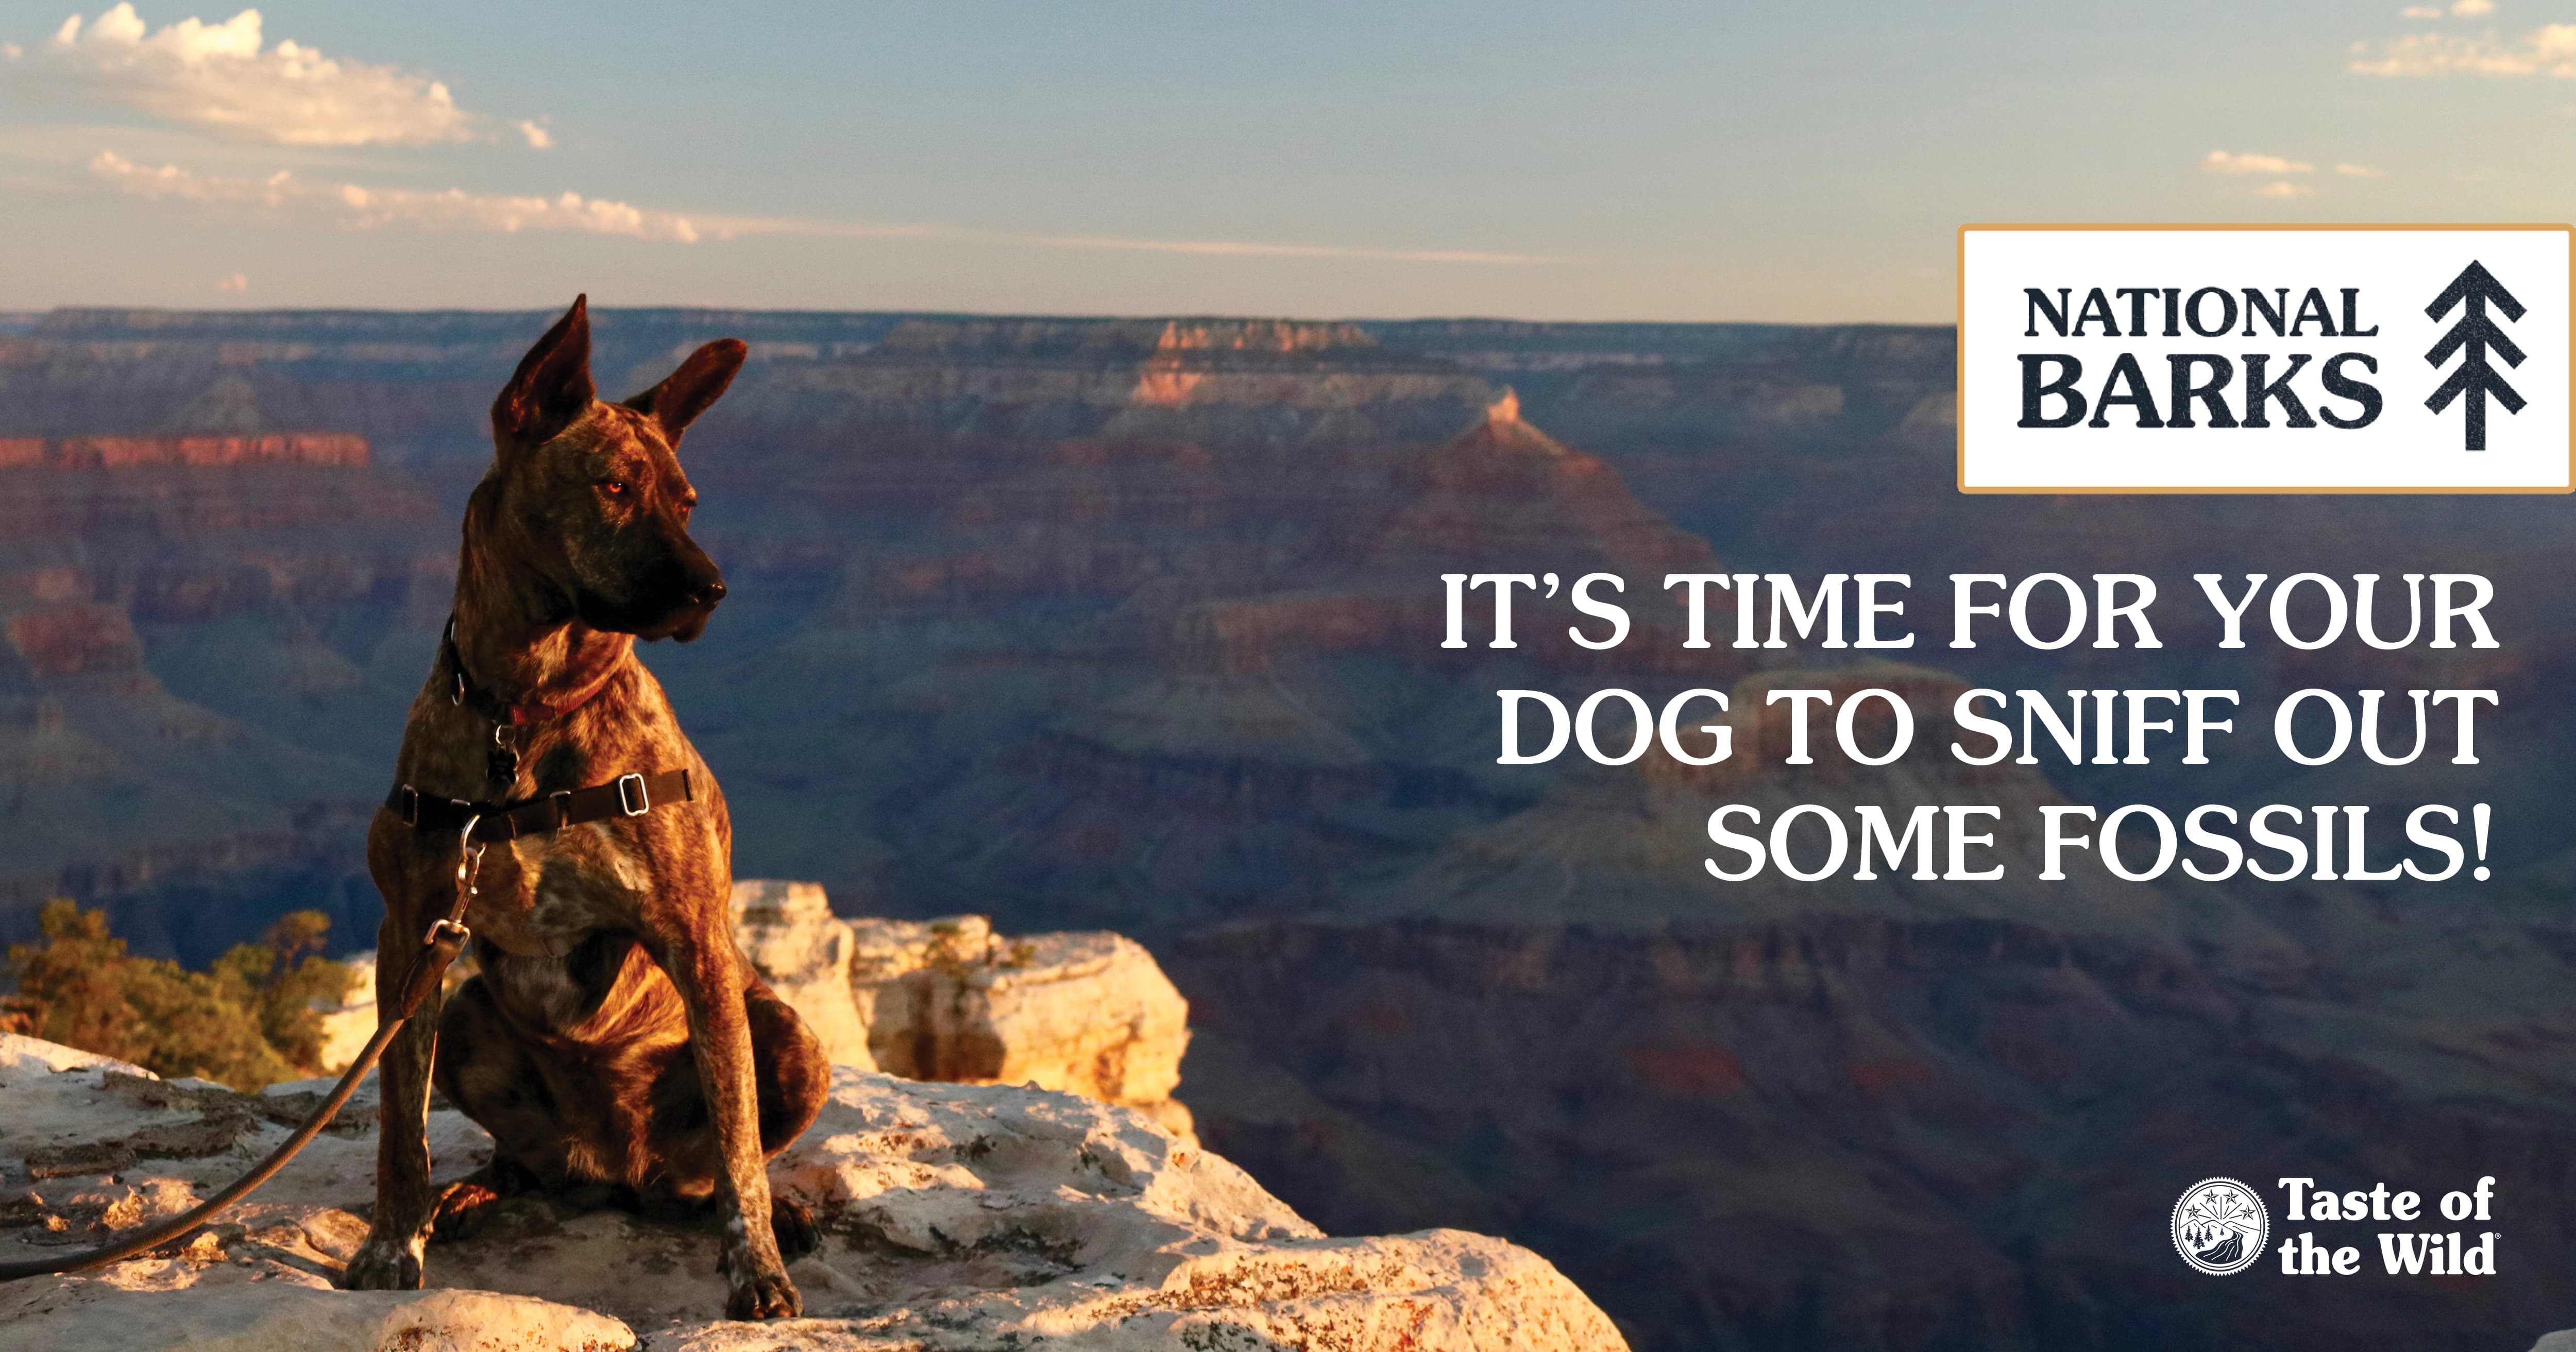 A dog on a leash staring out over the grand canyon next to text that reads ‘It’s time for your dog to sniff out some fossils’.